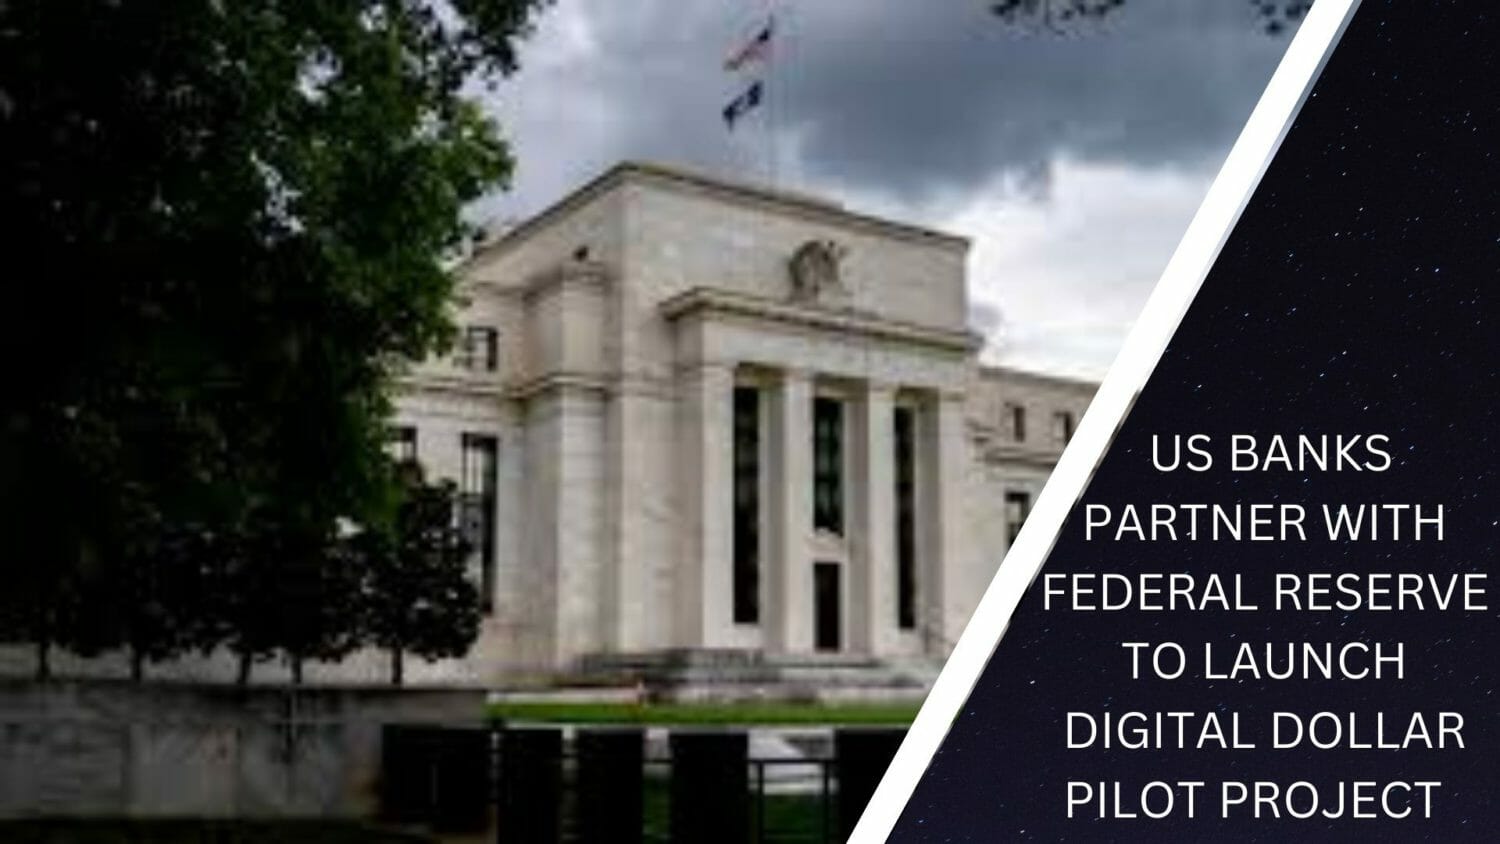 Us Banks Partner With Federal Reserve To Launch Digital Dollar Pilot Project